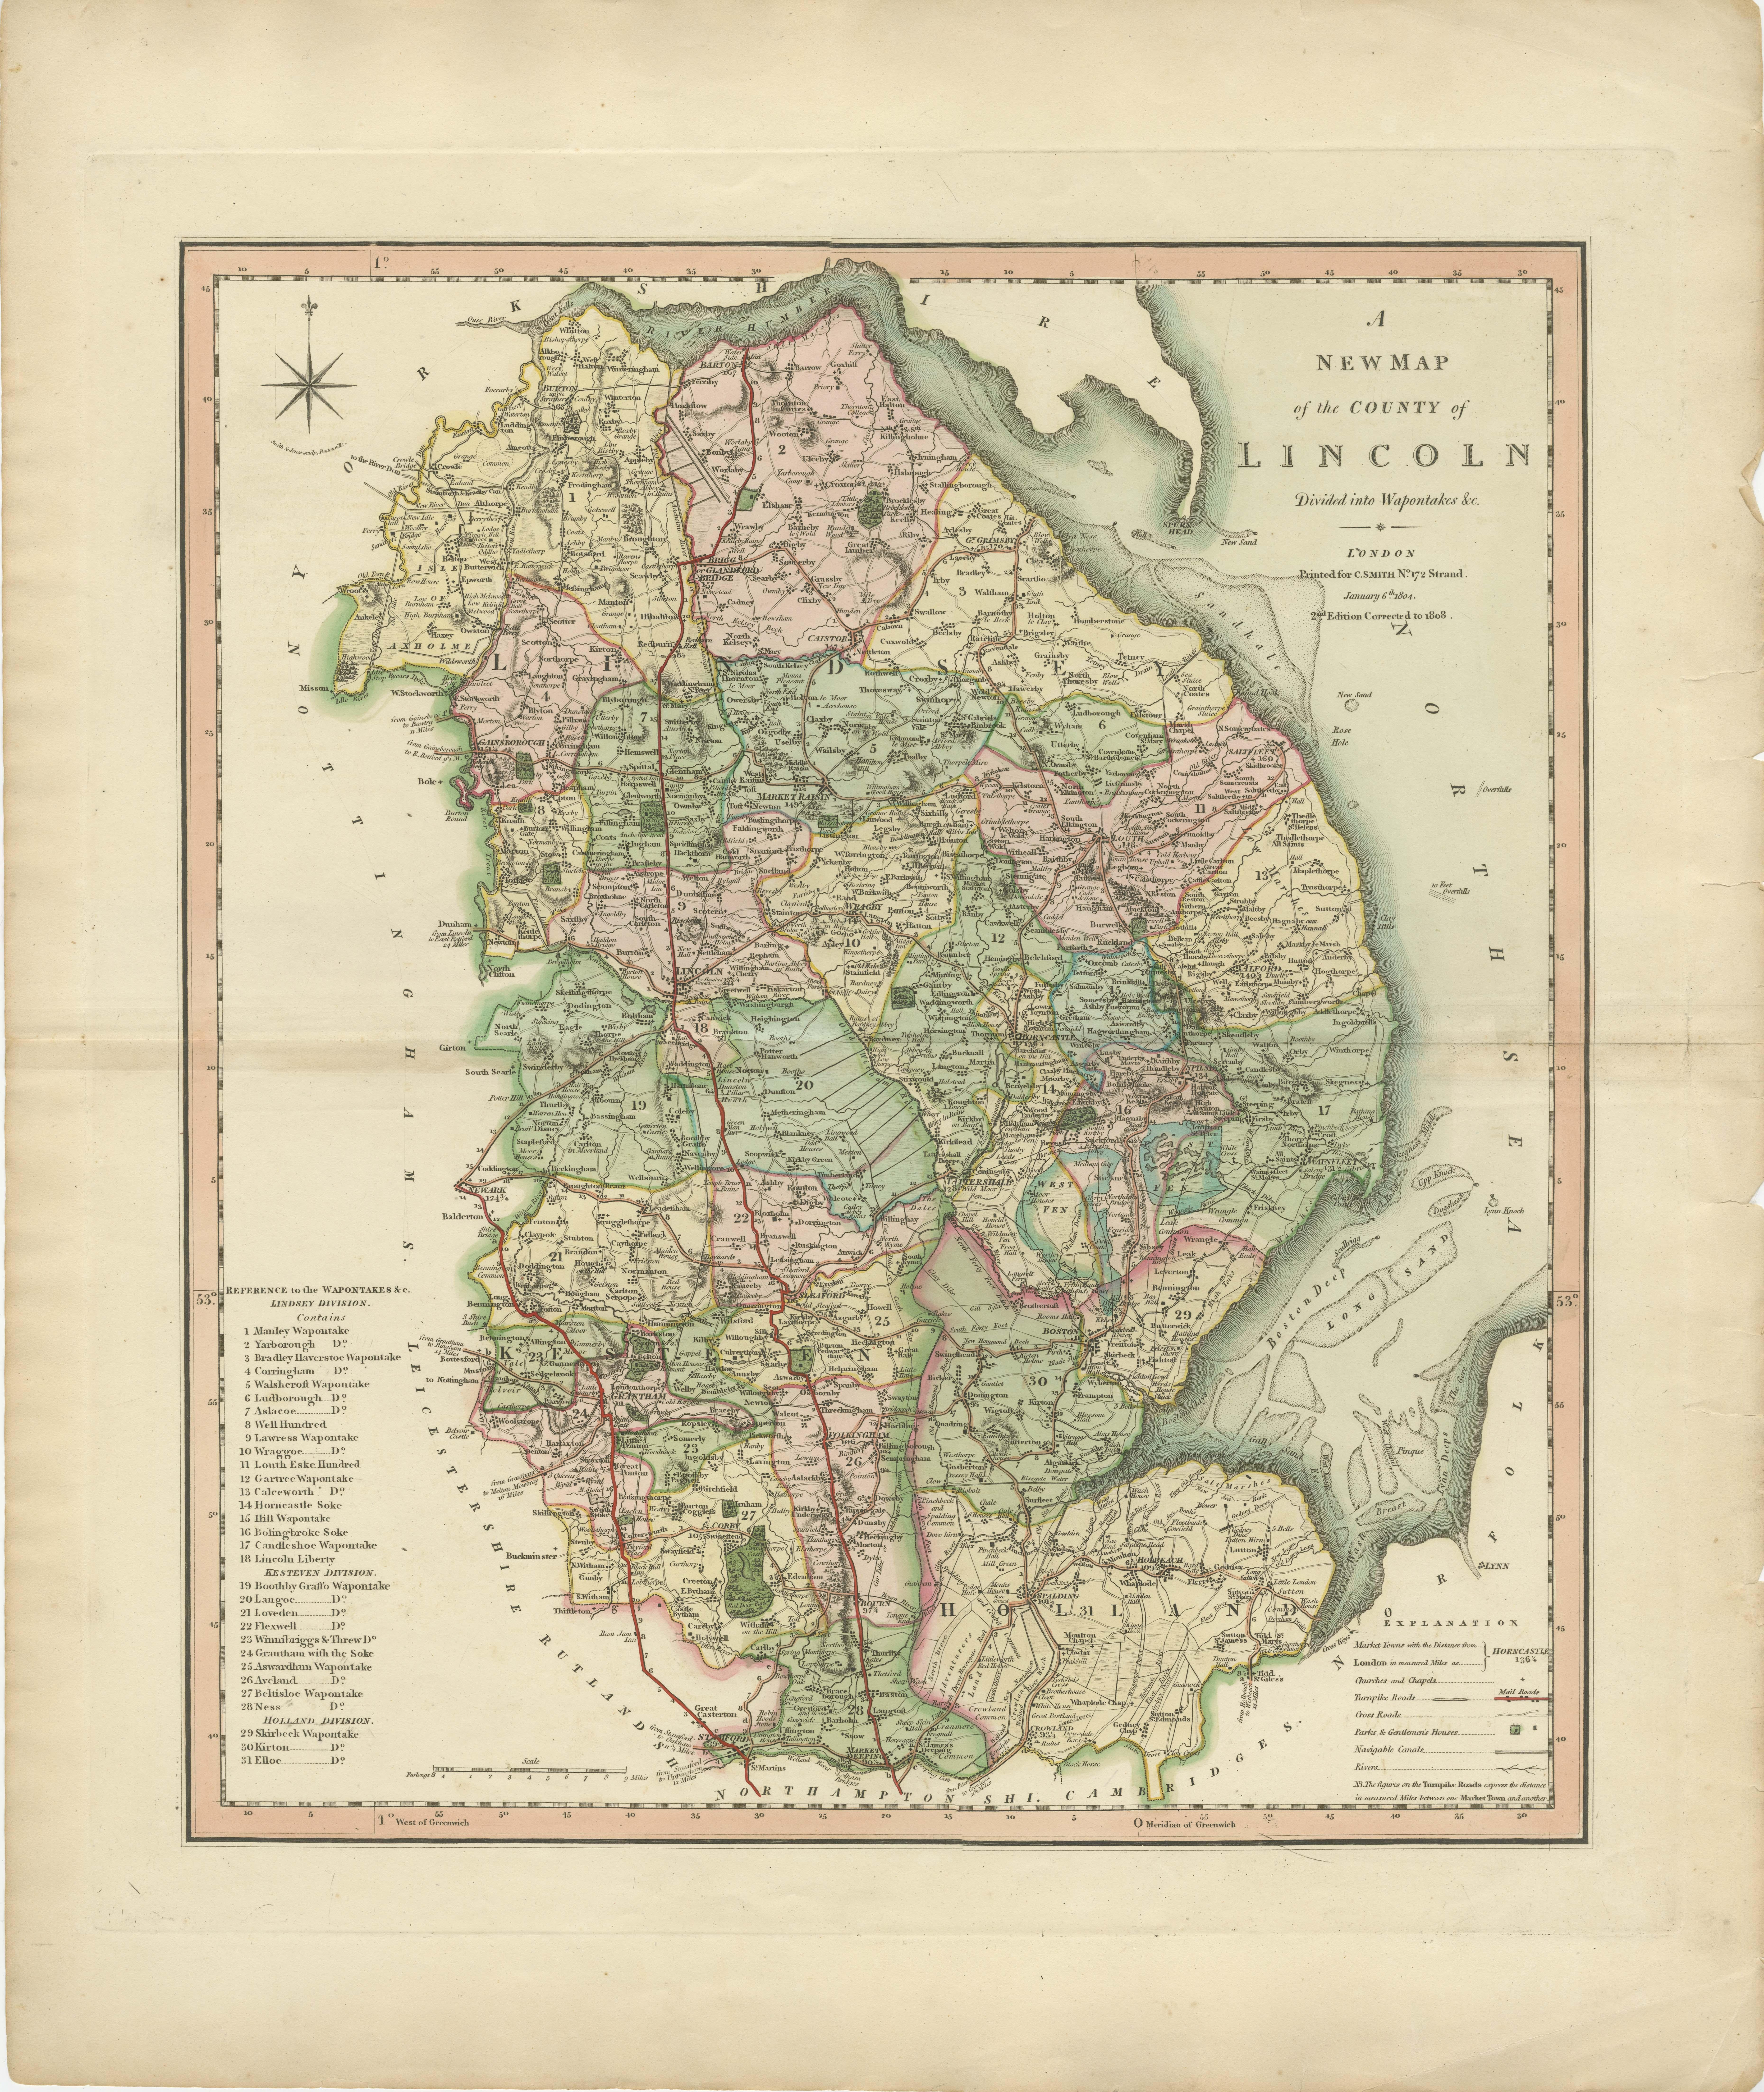 Antique county map of Lincolnshire first published circa 1800 Cities illustrated include Grantham, Spalding, Boston, and Market Raisin.

Charles Smith was a cartographer working in London from circa 1800. His maps were finely engraved on copper